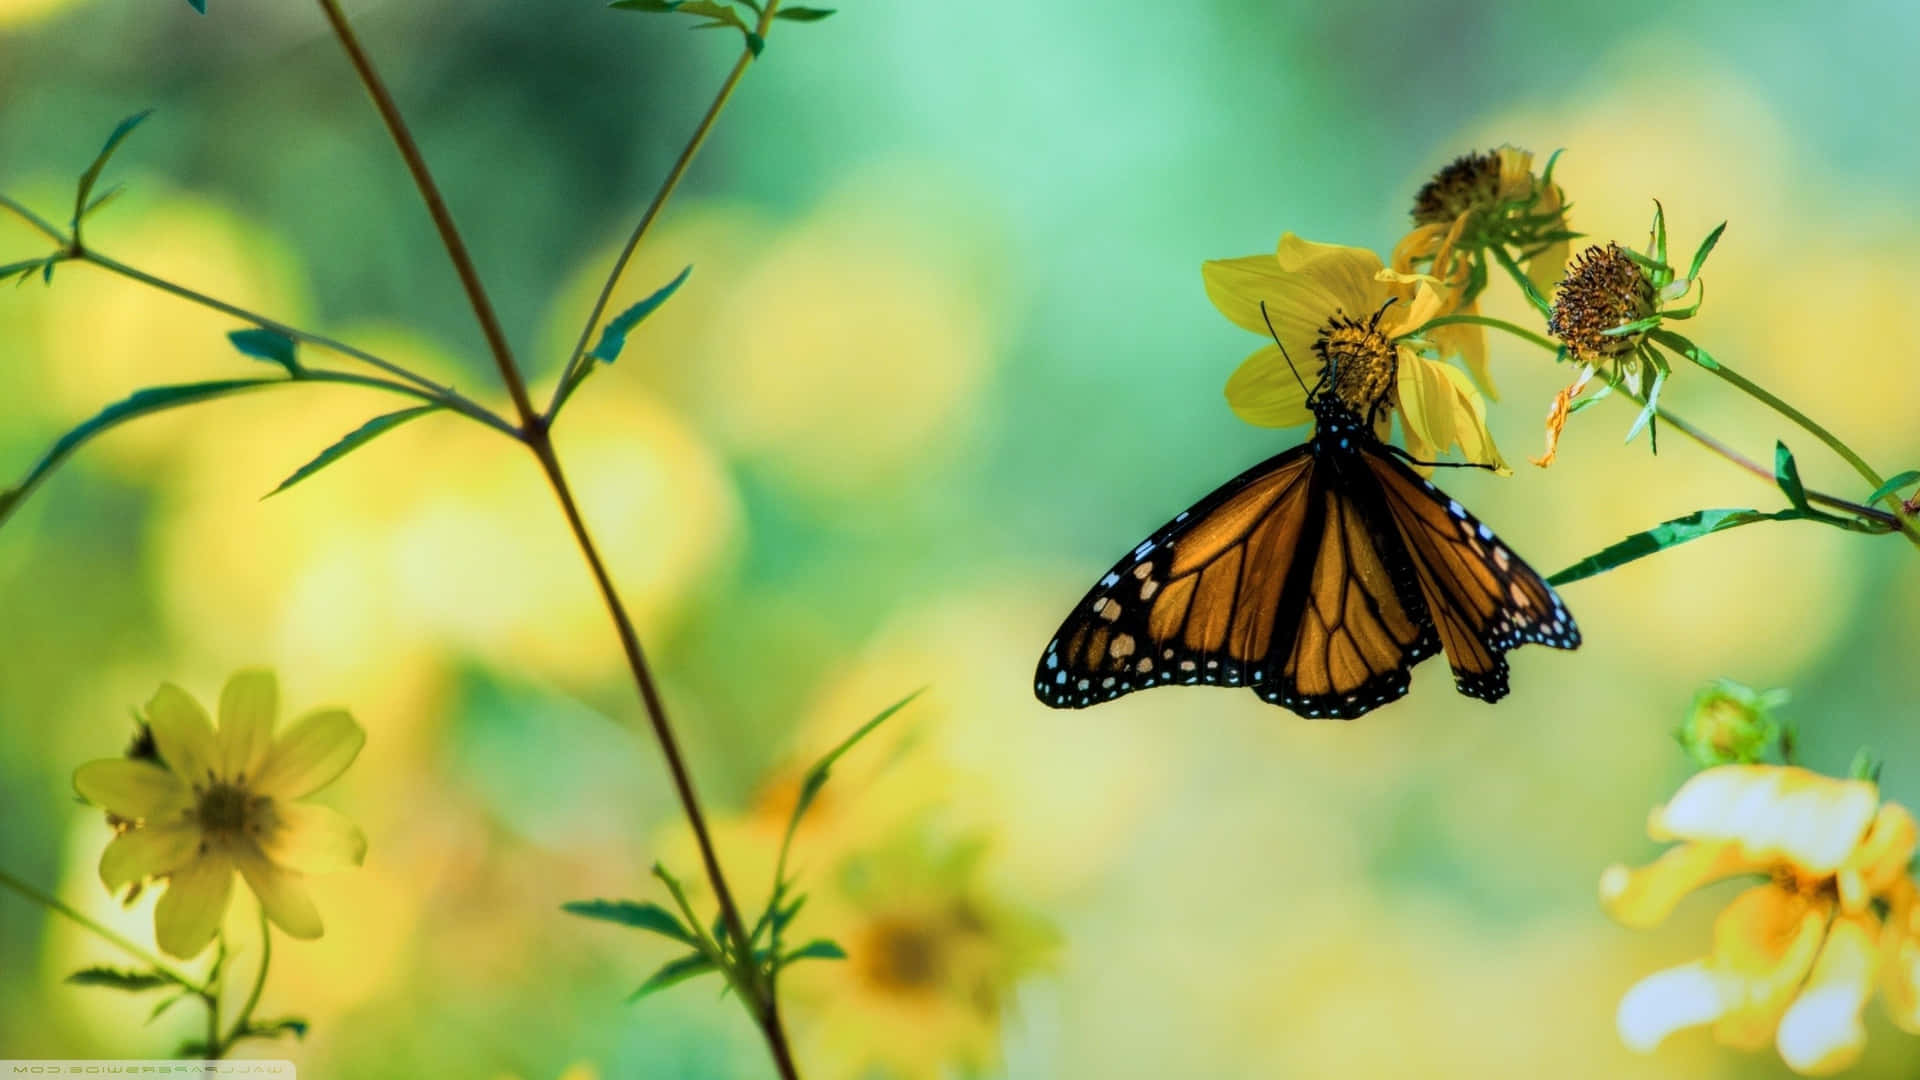 A monarch butterfly perched on a flower